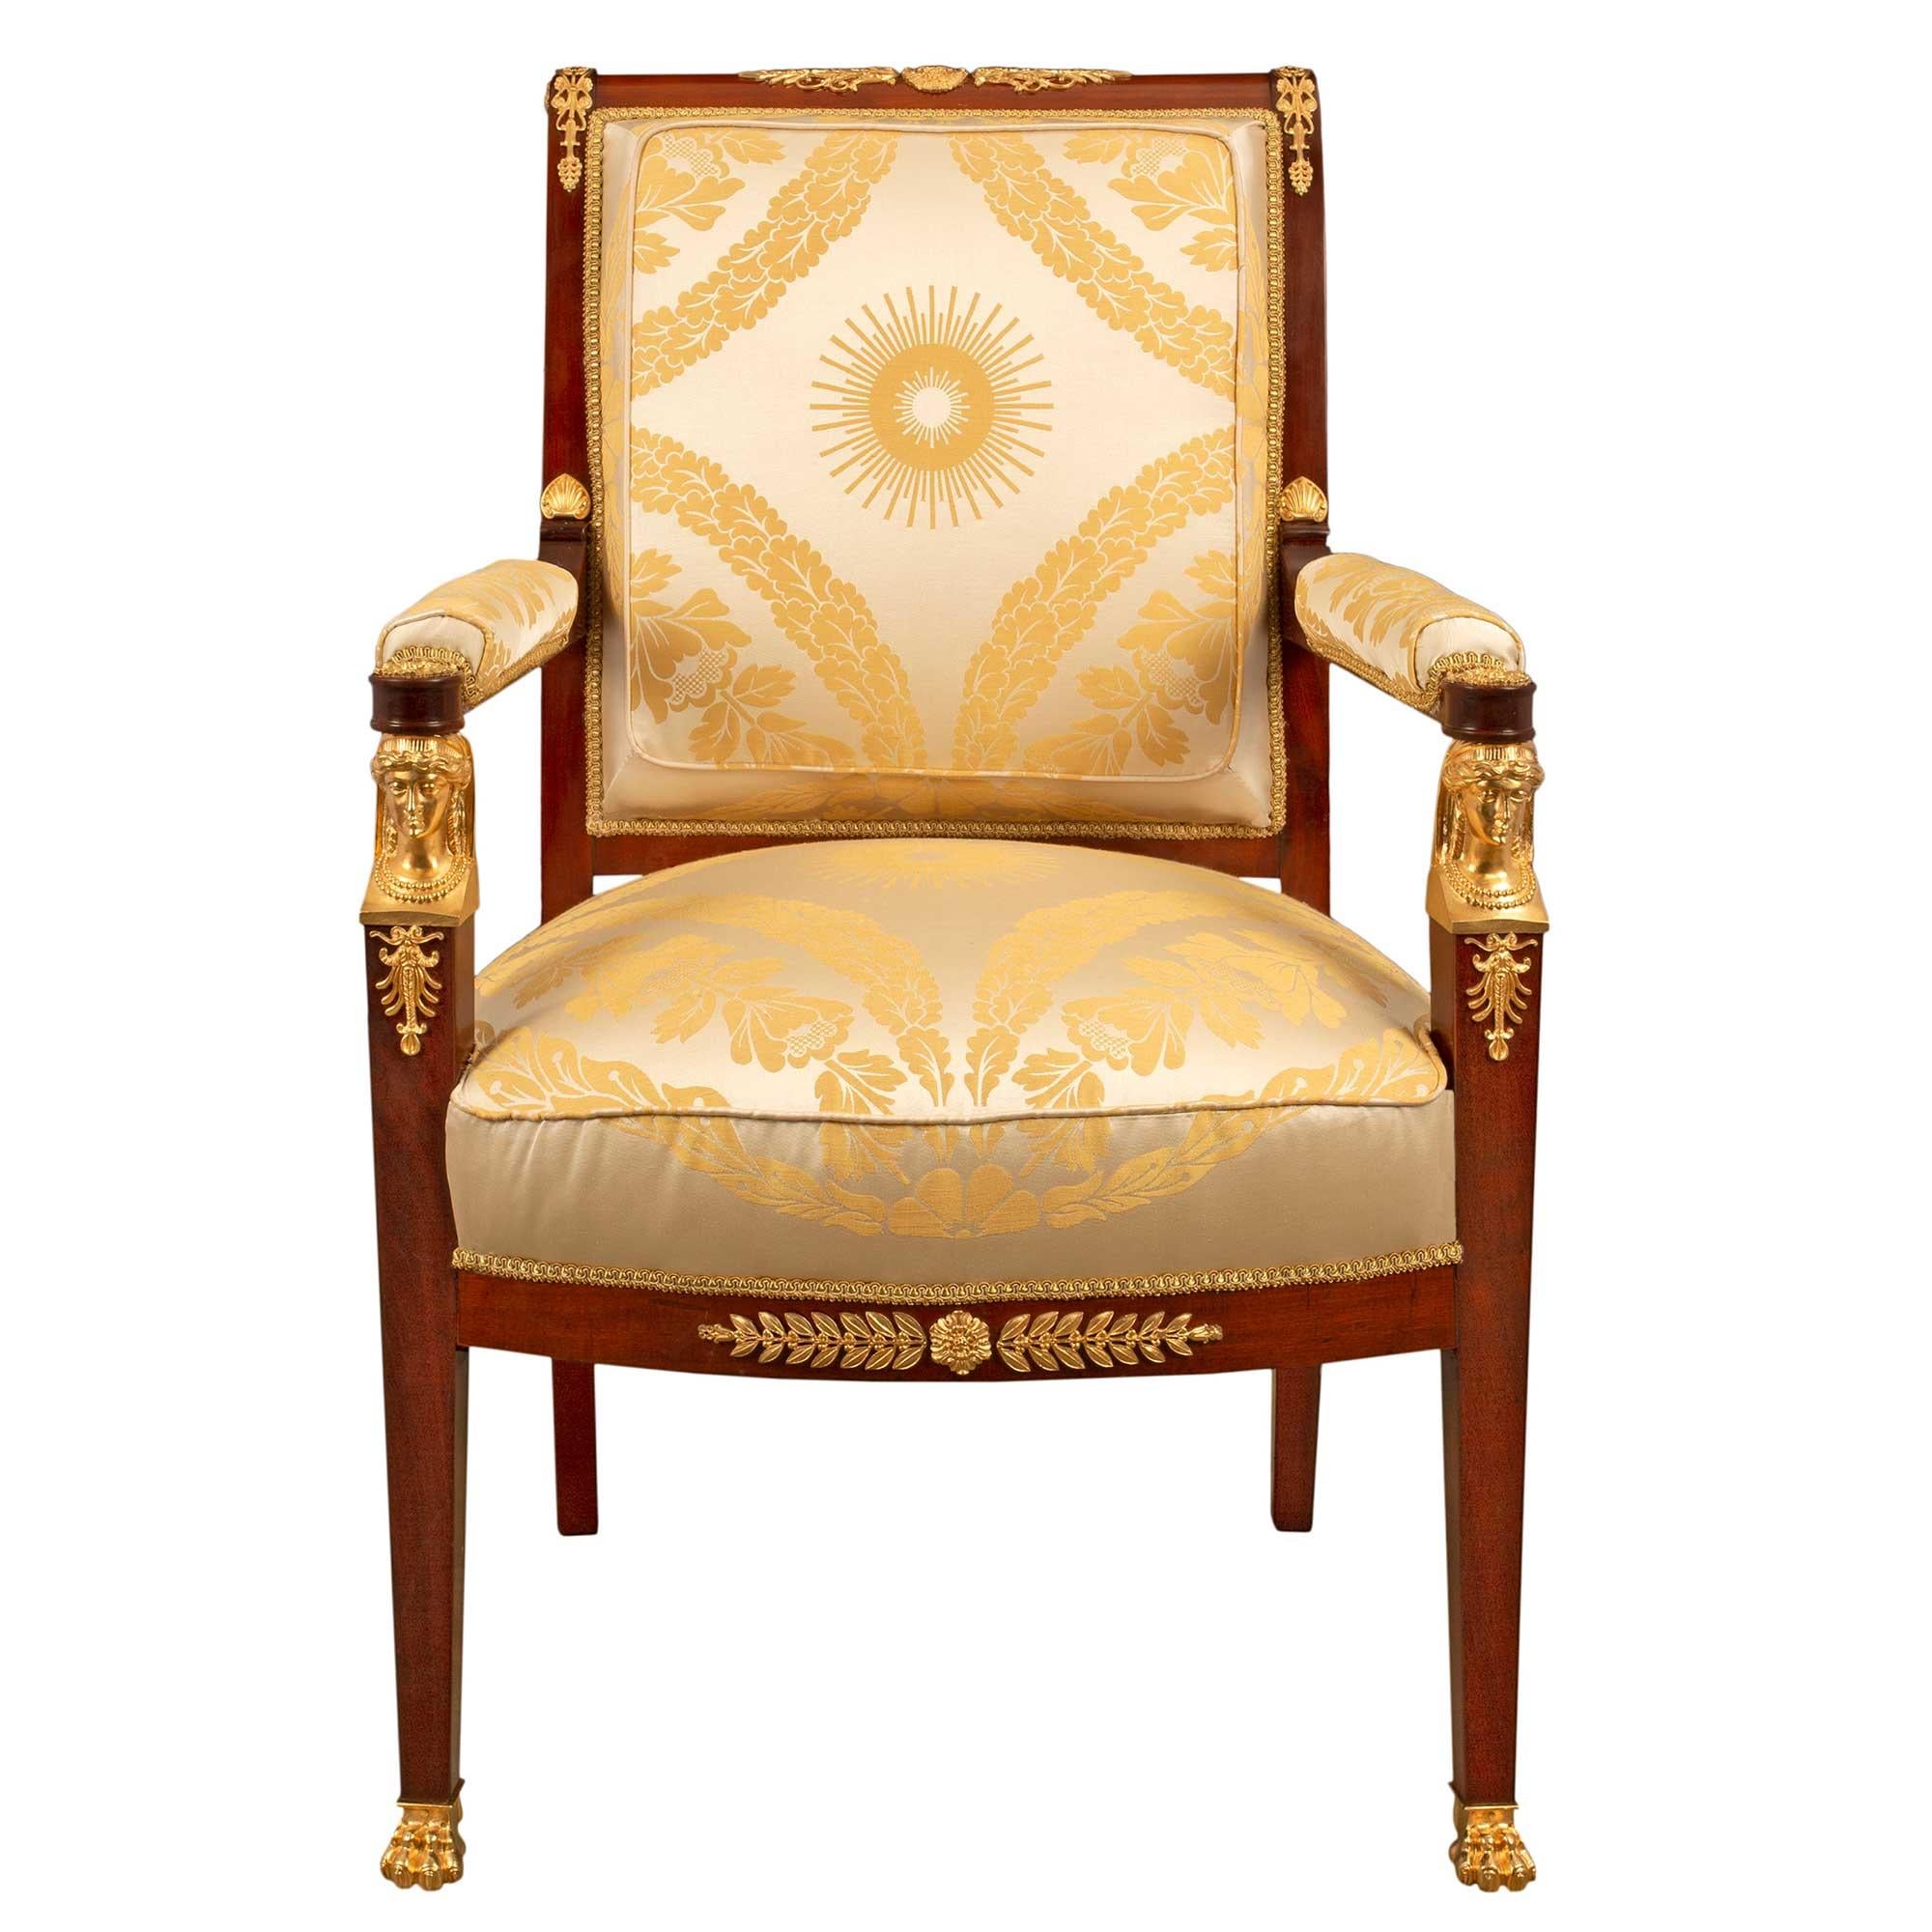 A most handsome French mid-19th century Empire style mahogany and ormolu mounted pair of armchairs. The pair are raised by front square tapered legs that have pawed ormolu feet and exquisite and richly chased caryatids at the top below the arm